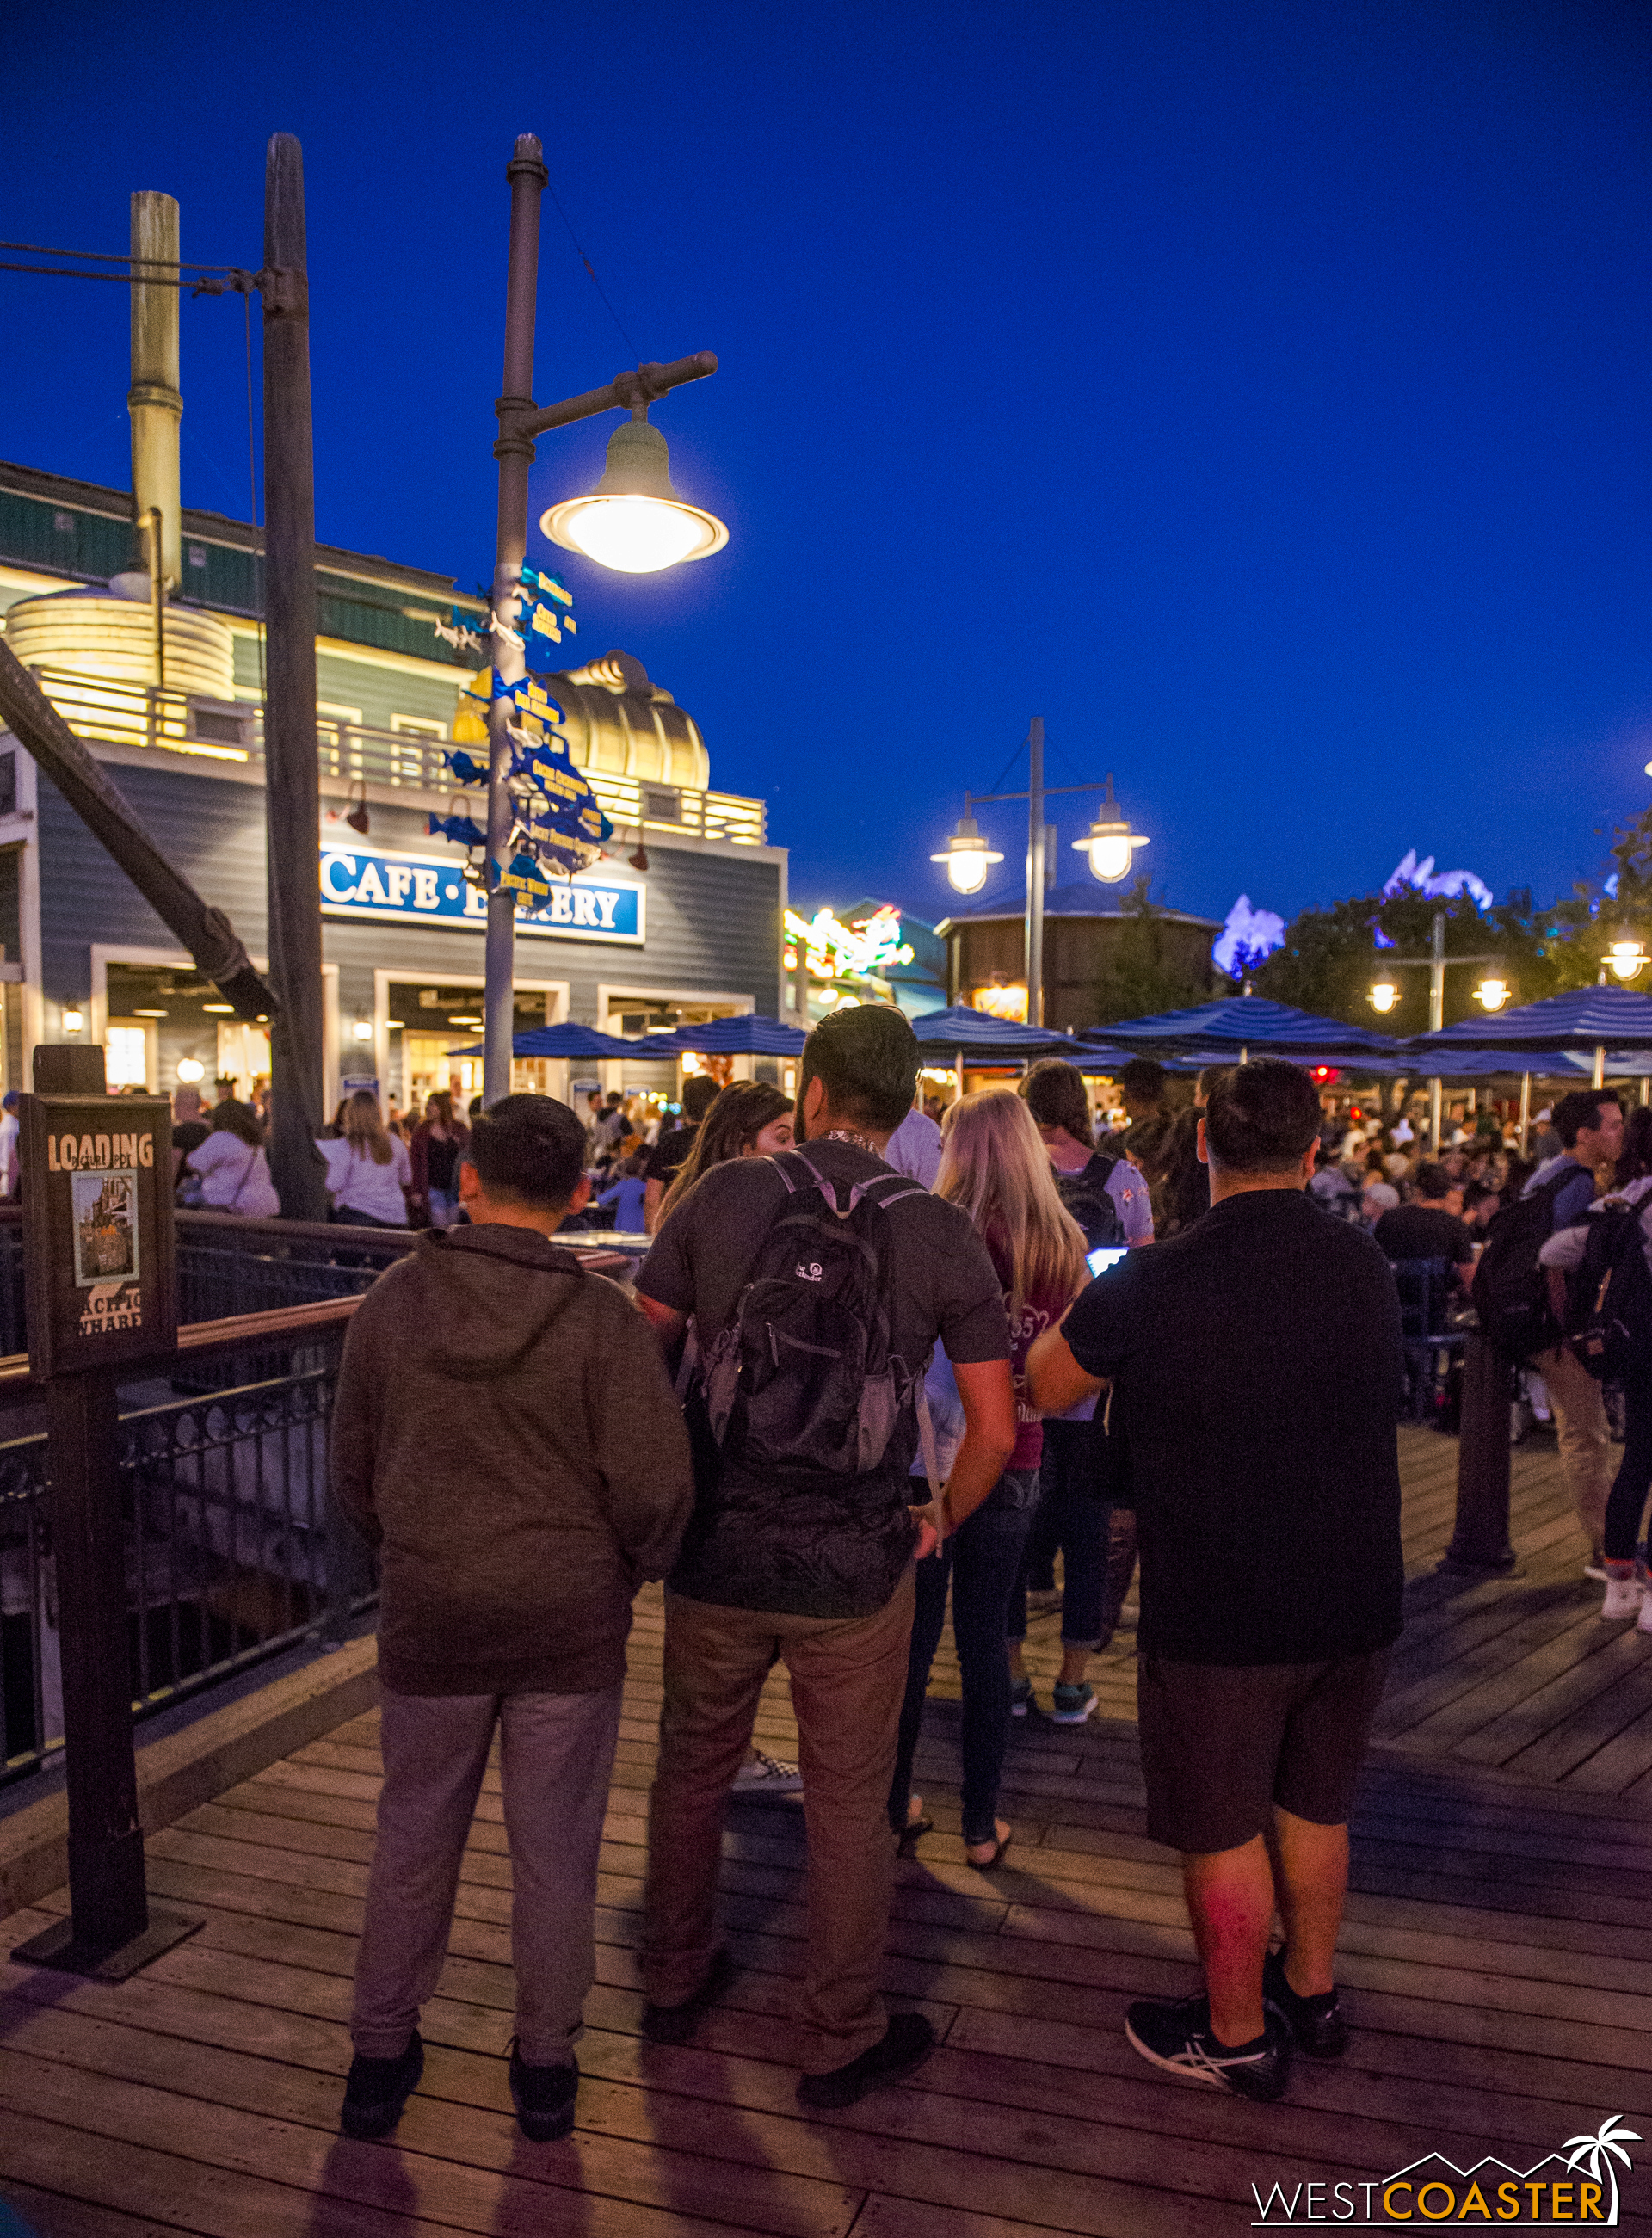  See? Look at this line into the Pacific Wharf Cafe, where you can purchase Choup. &nbsp;It's way out the door and nearing the bridge into Pacific Wharf. &nbsp;If that isn't proof of Choup's greatness, I don't know what is. 